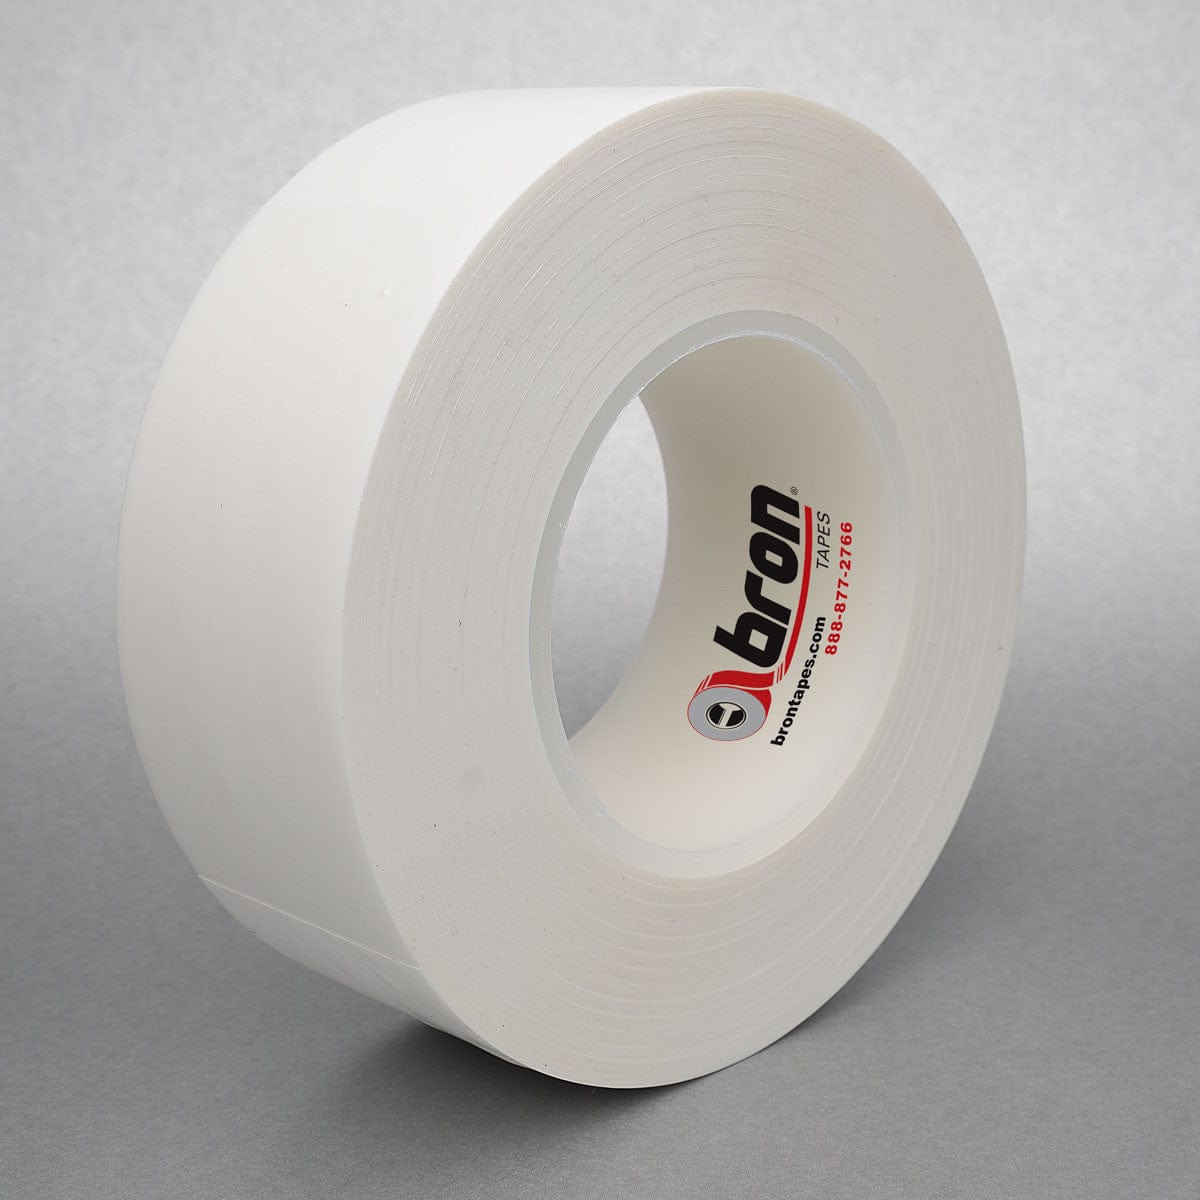 RE-U-ZIP INNOVATIVE DUST BARRIER SOLUTIONS Construction FLAME RETARDANT POLY BARRIER TAPE